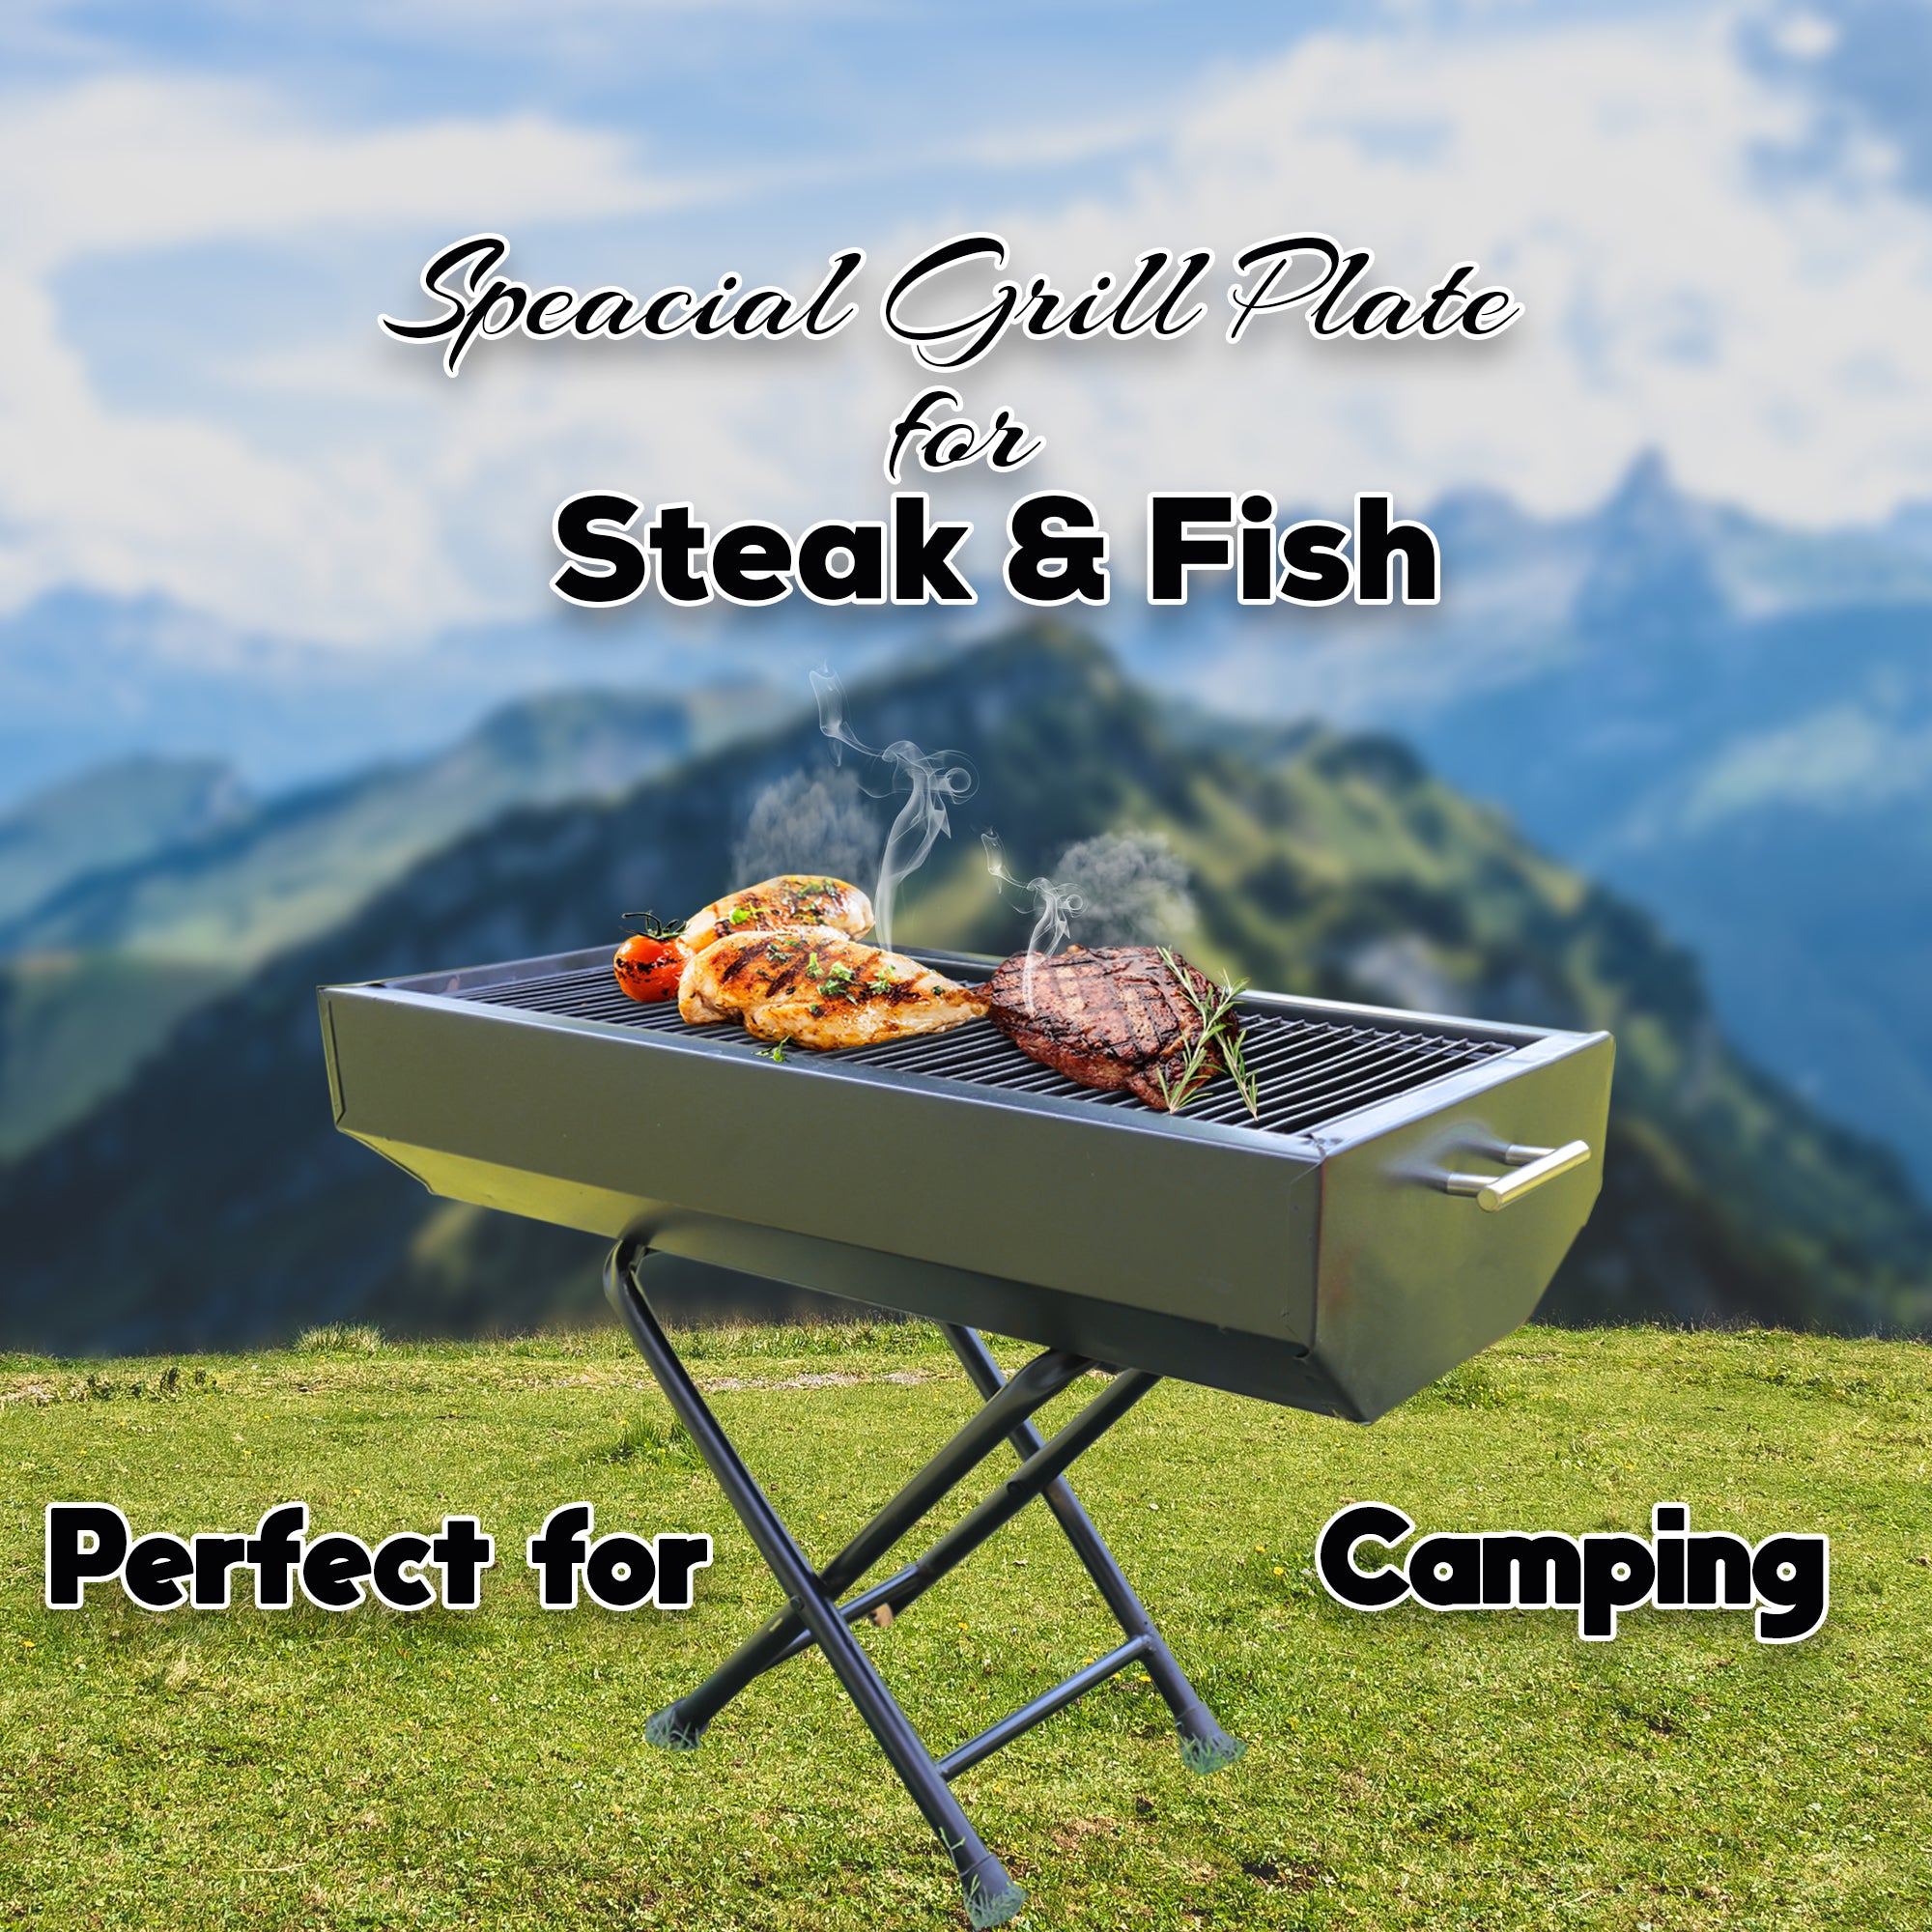 Chef Best stainless steel bbq grill pan barbeque steak and fish grill plate special edition - chef cookware